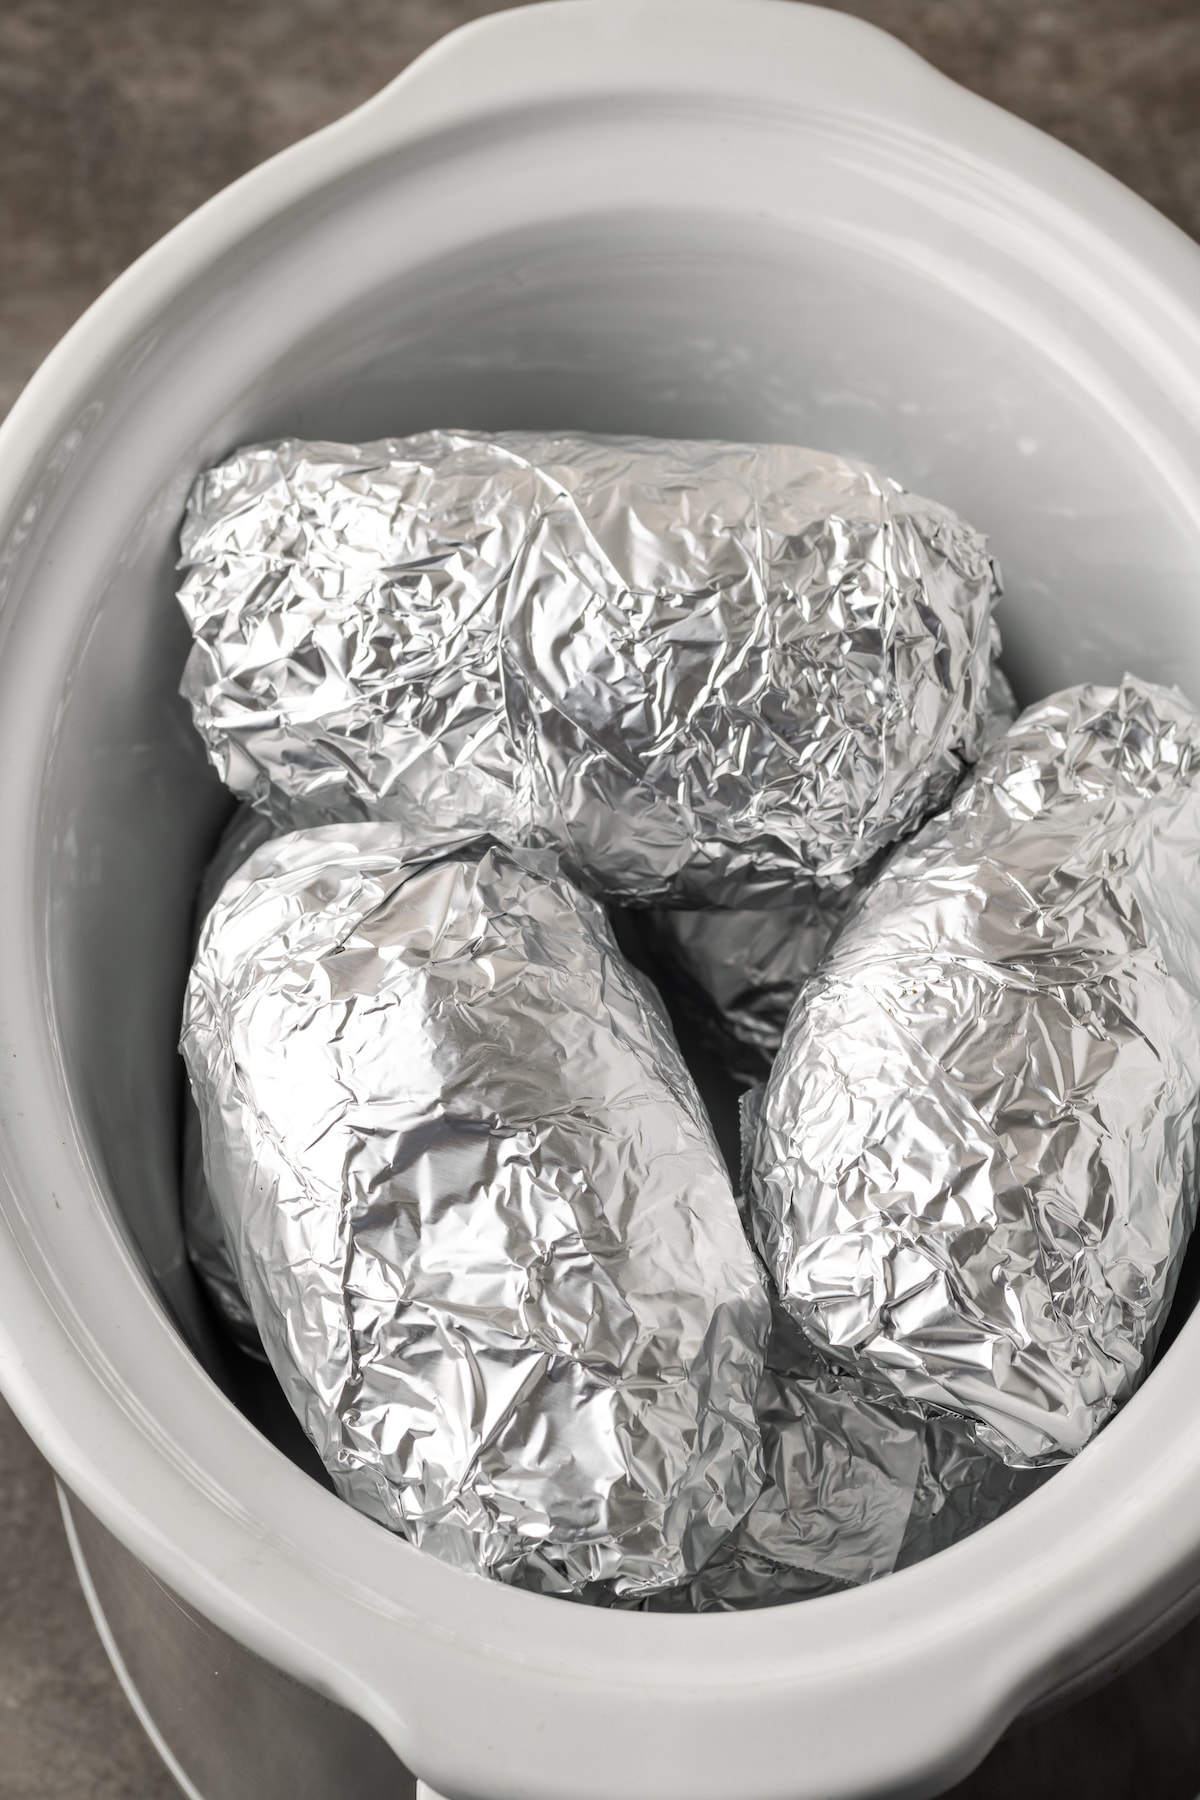 Potatoes wrapped in foil inside the clay pot.